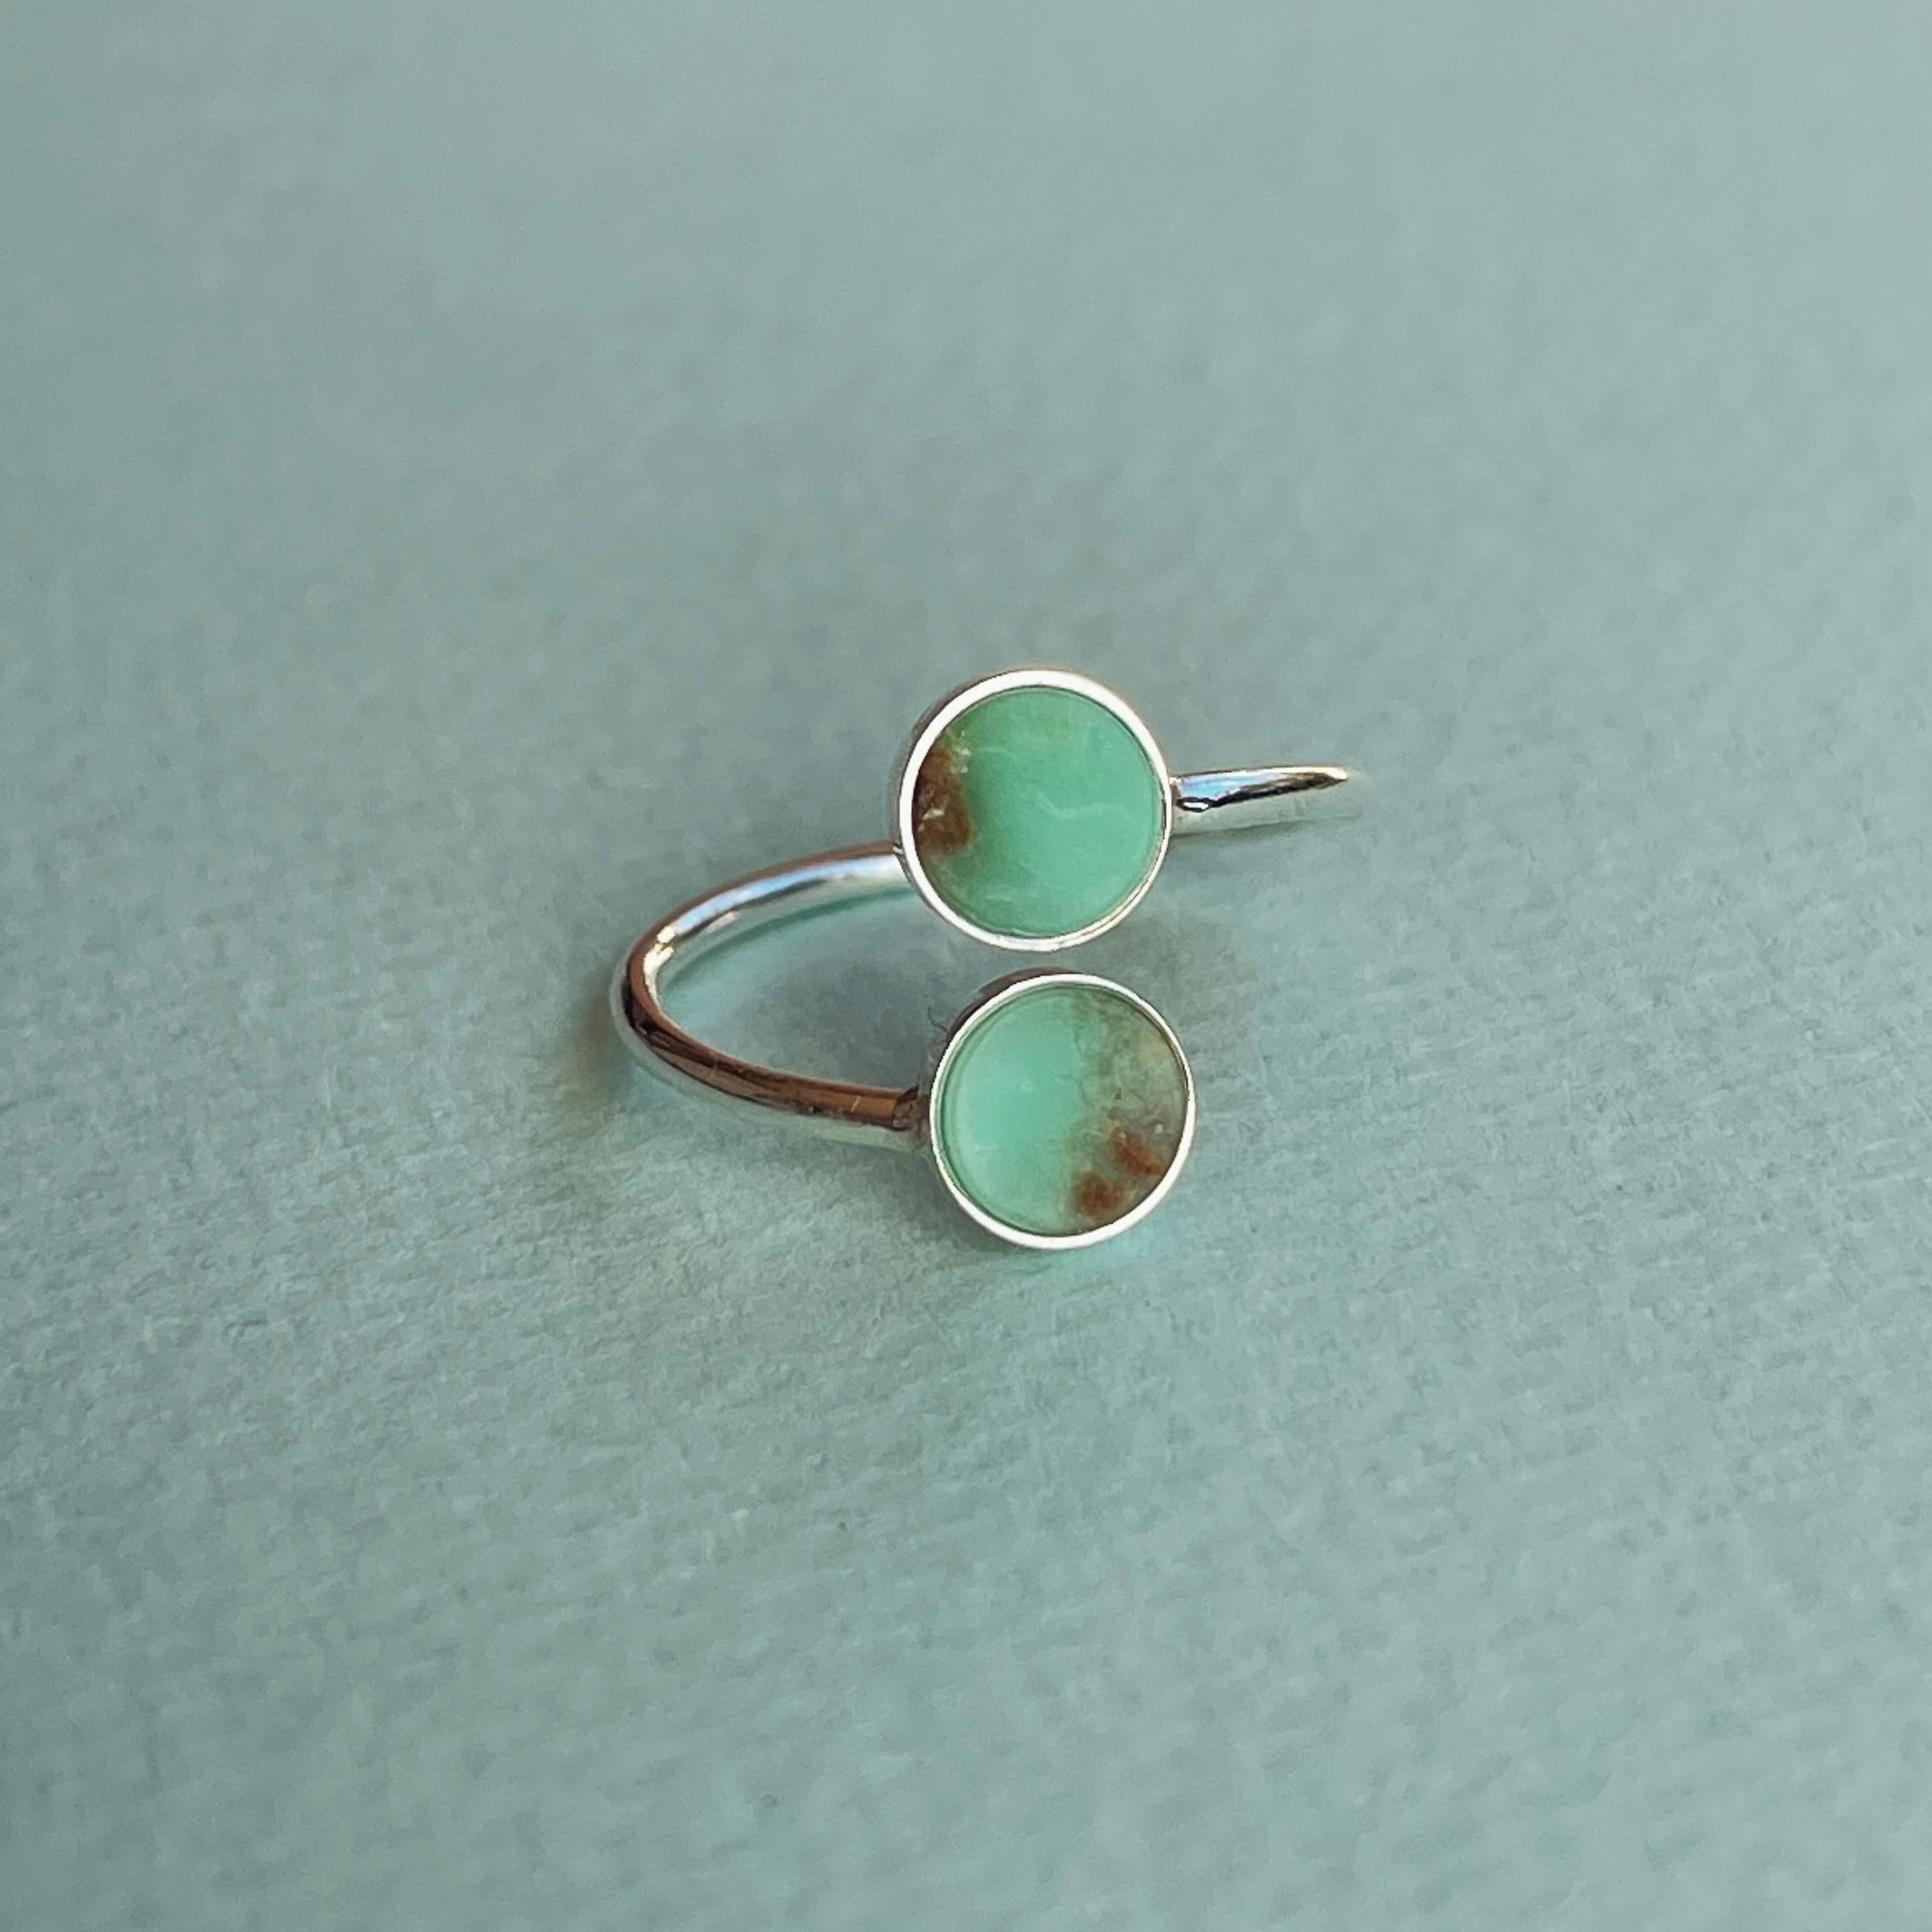 Elevate your style with our sterling silver ring featuring stunning chrysoprase stones in enchanting turquoise hues. This adjustable ring offers both timeless elegance and personalized comfort for a truly unique accessory.
The ring is made of